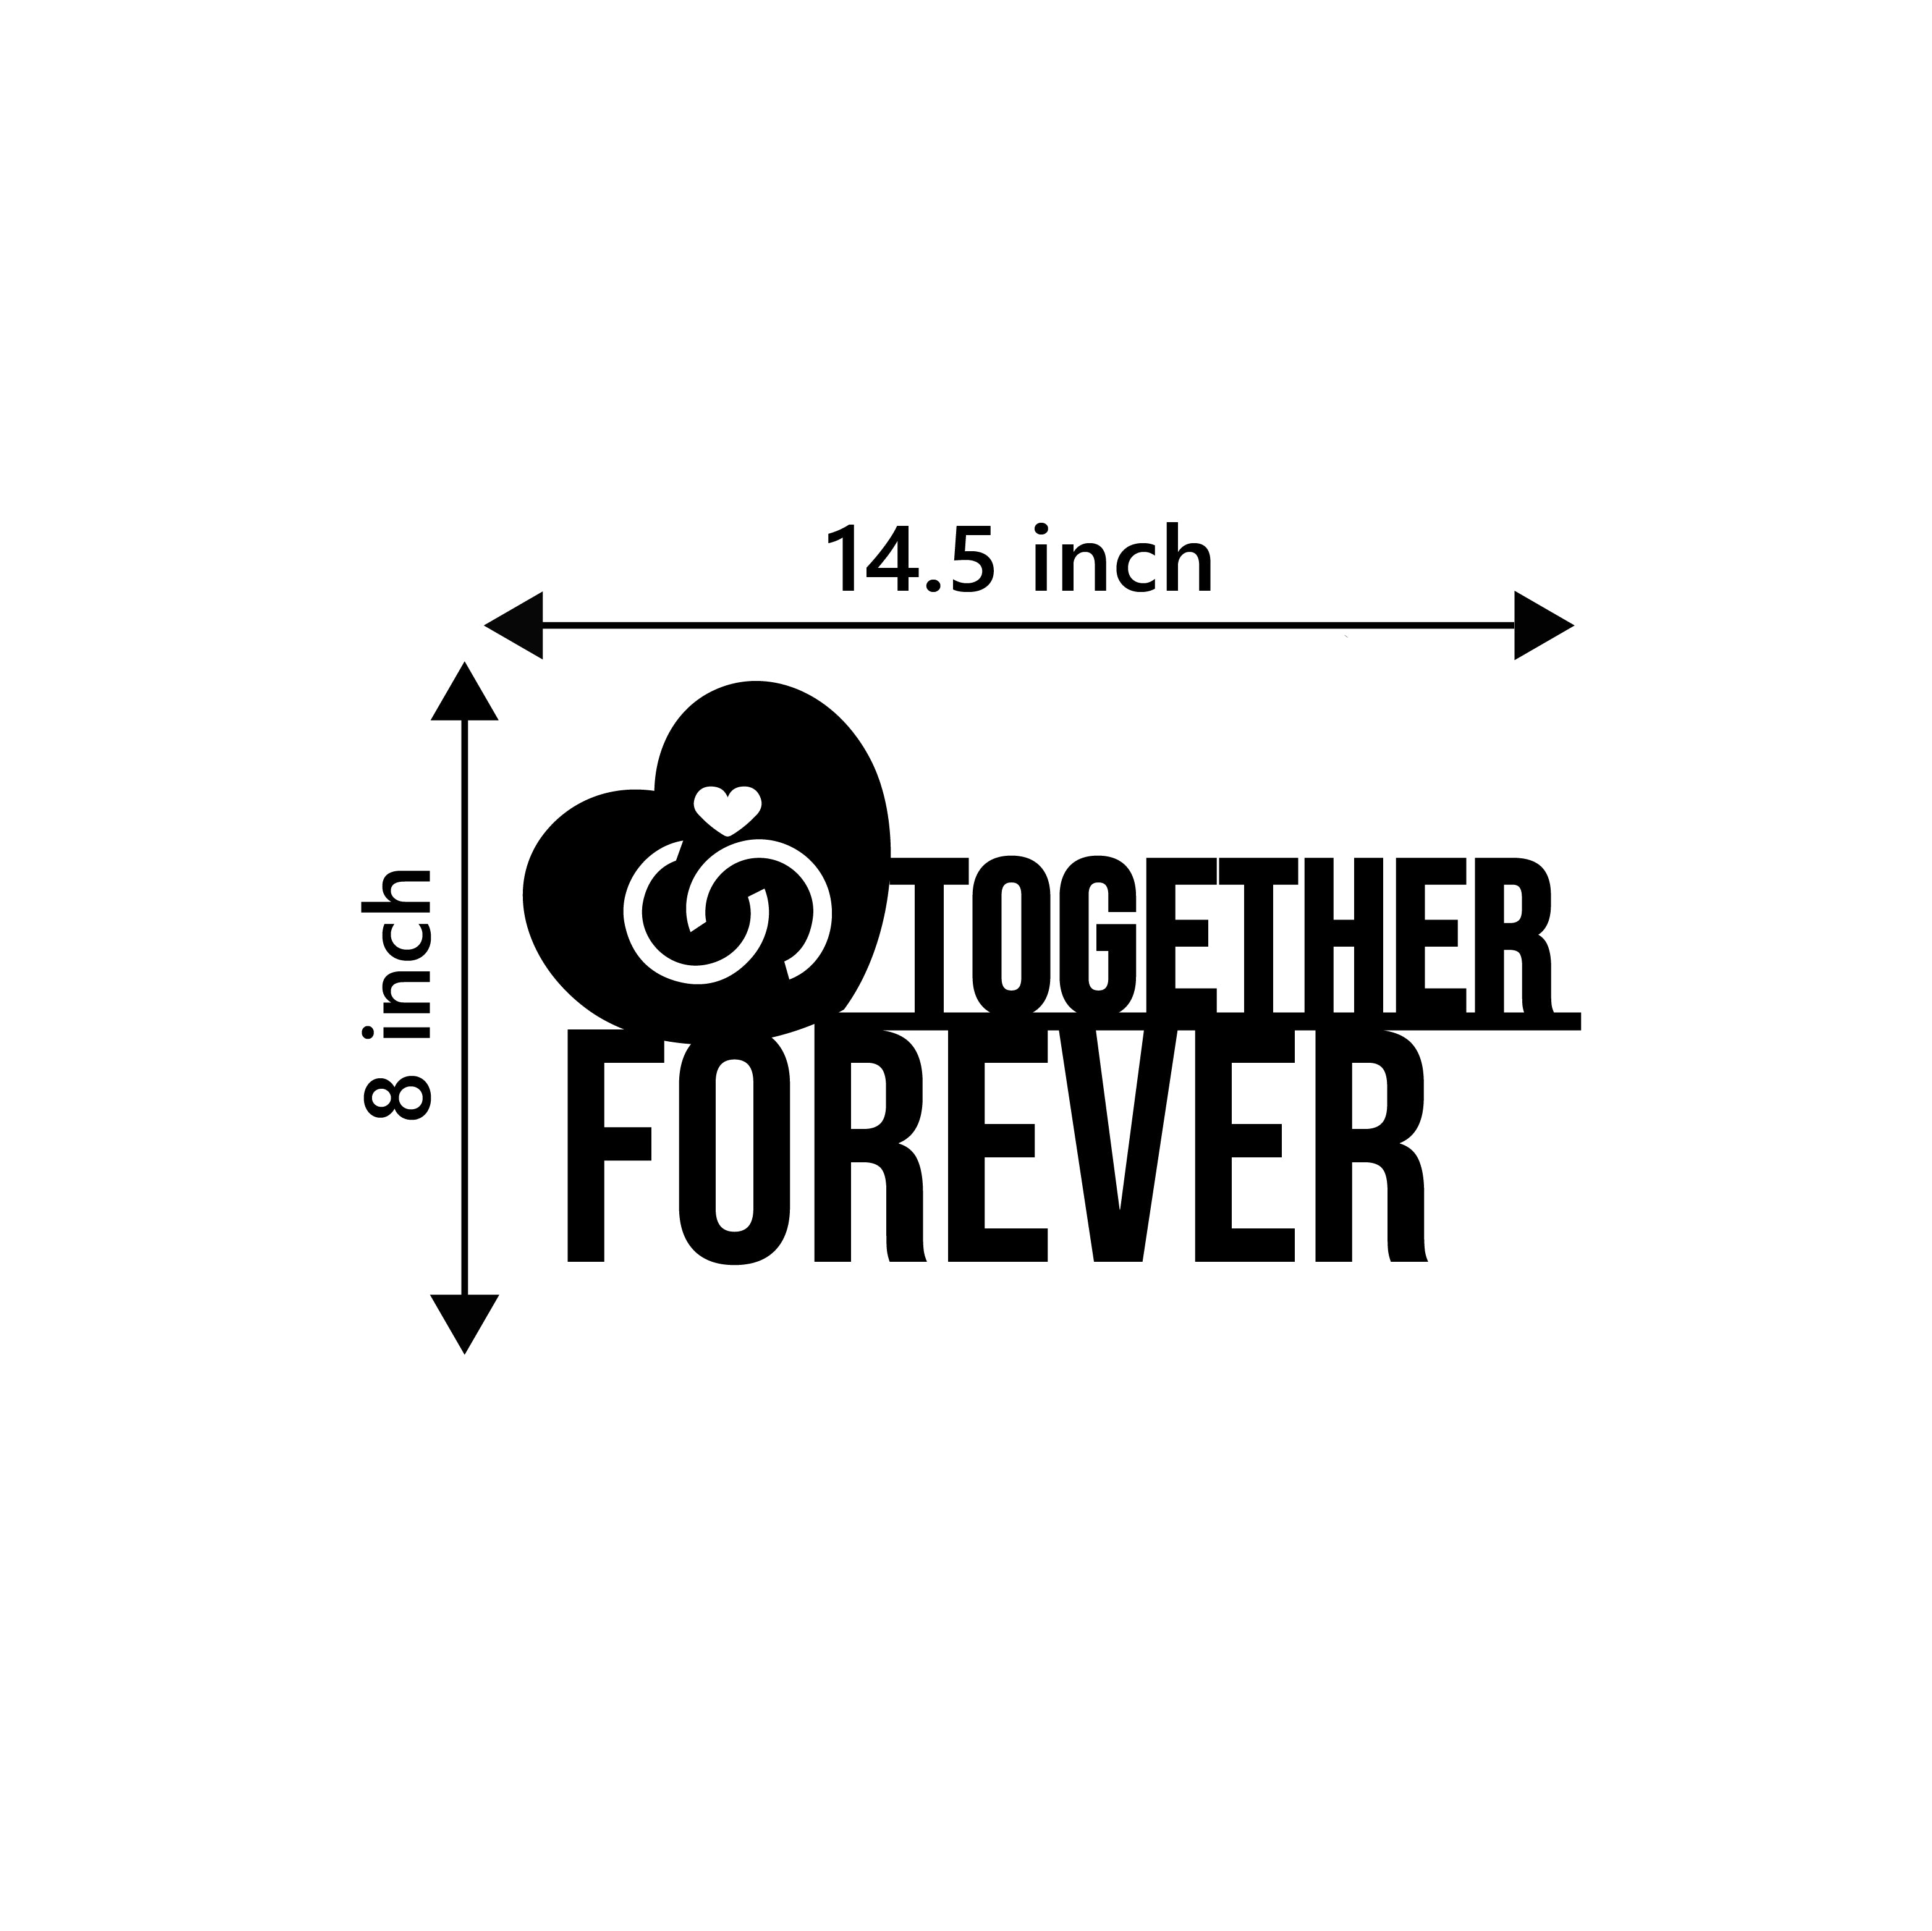 "Together Forever with Love band" Black Engineered Wood Wall Art Cutout, Ready to Hang Home Decor 3